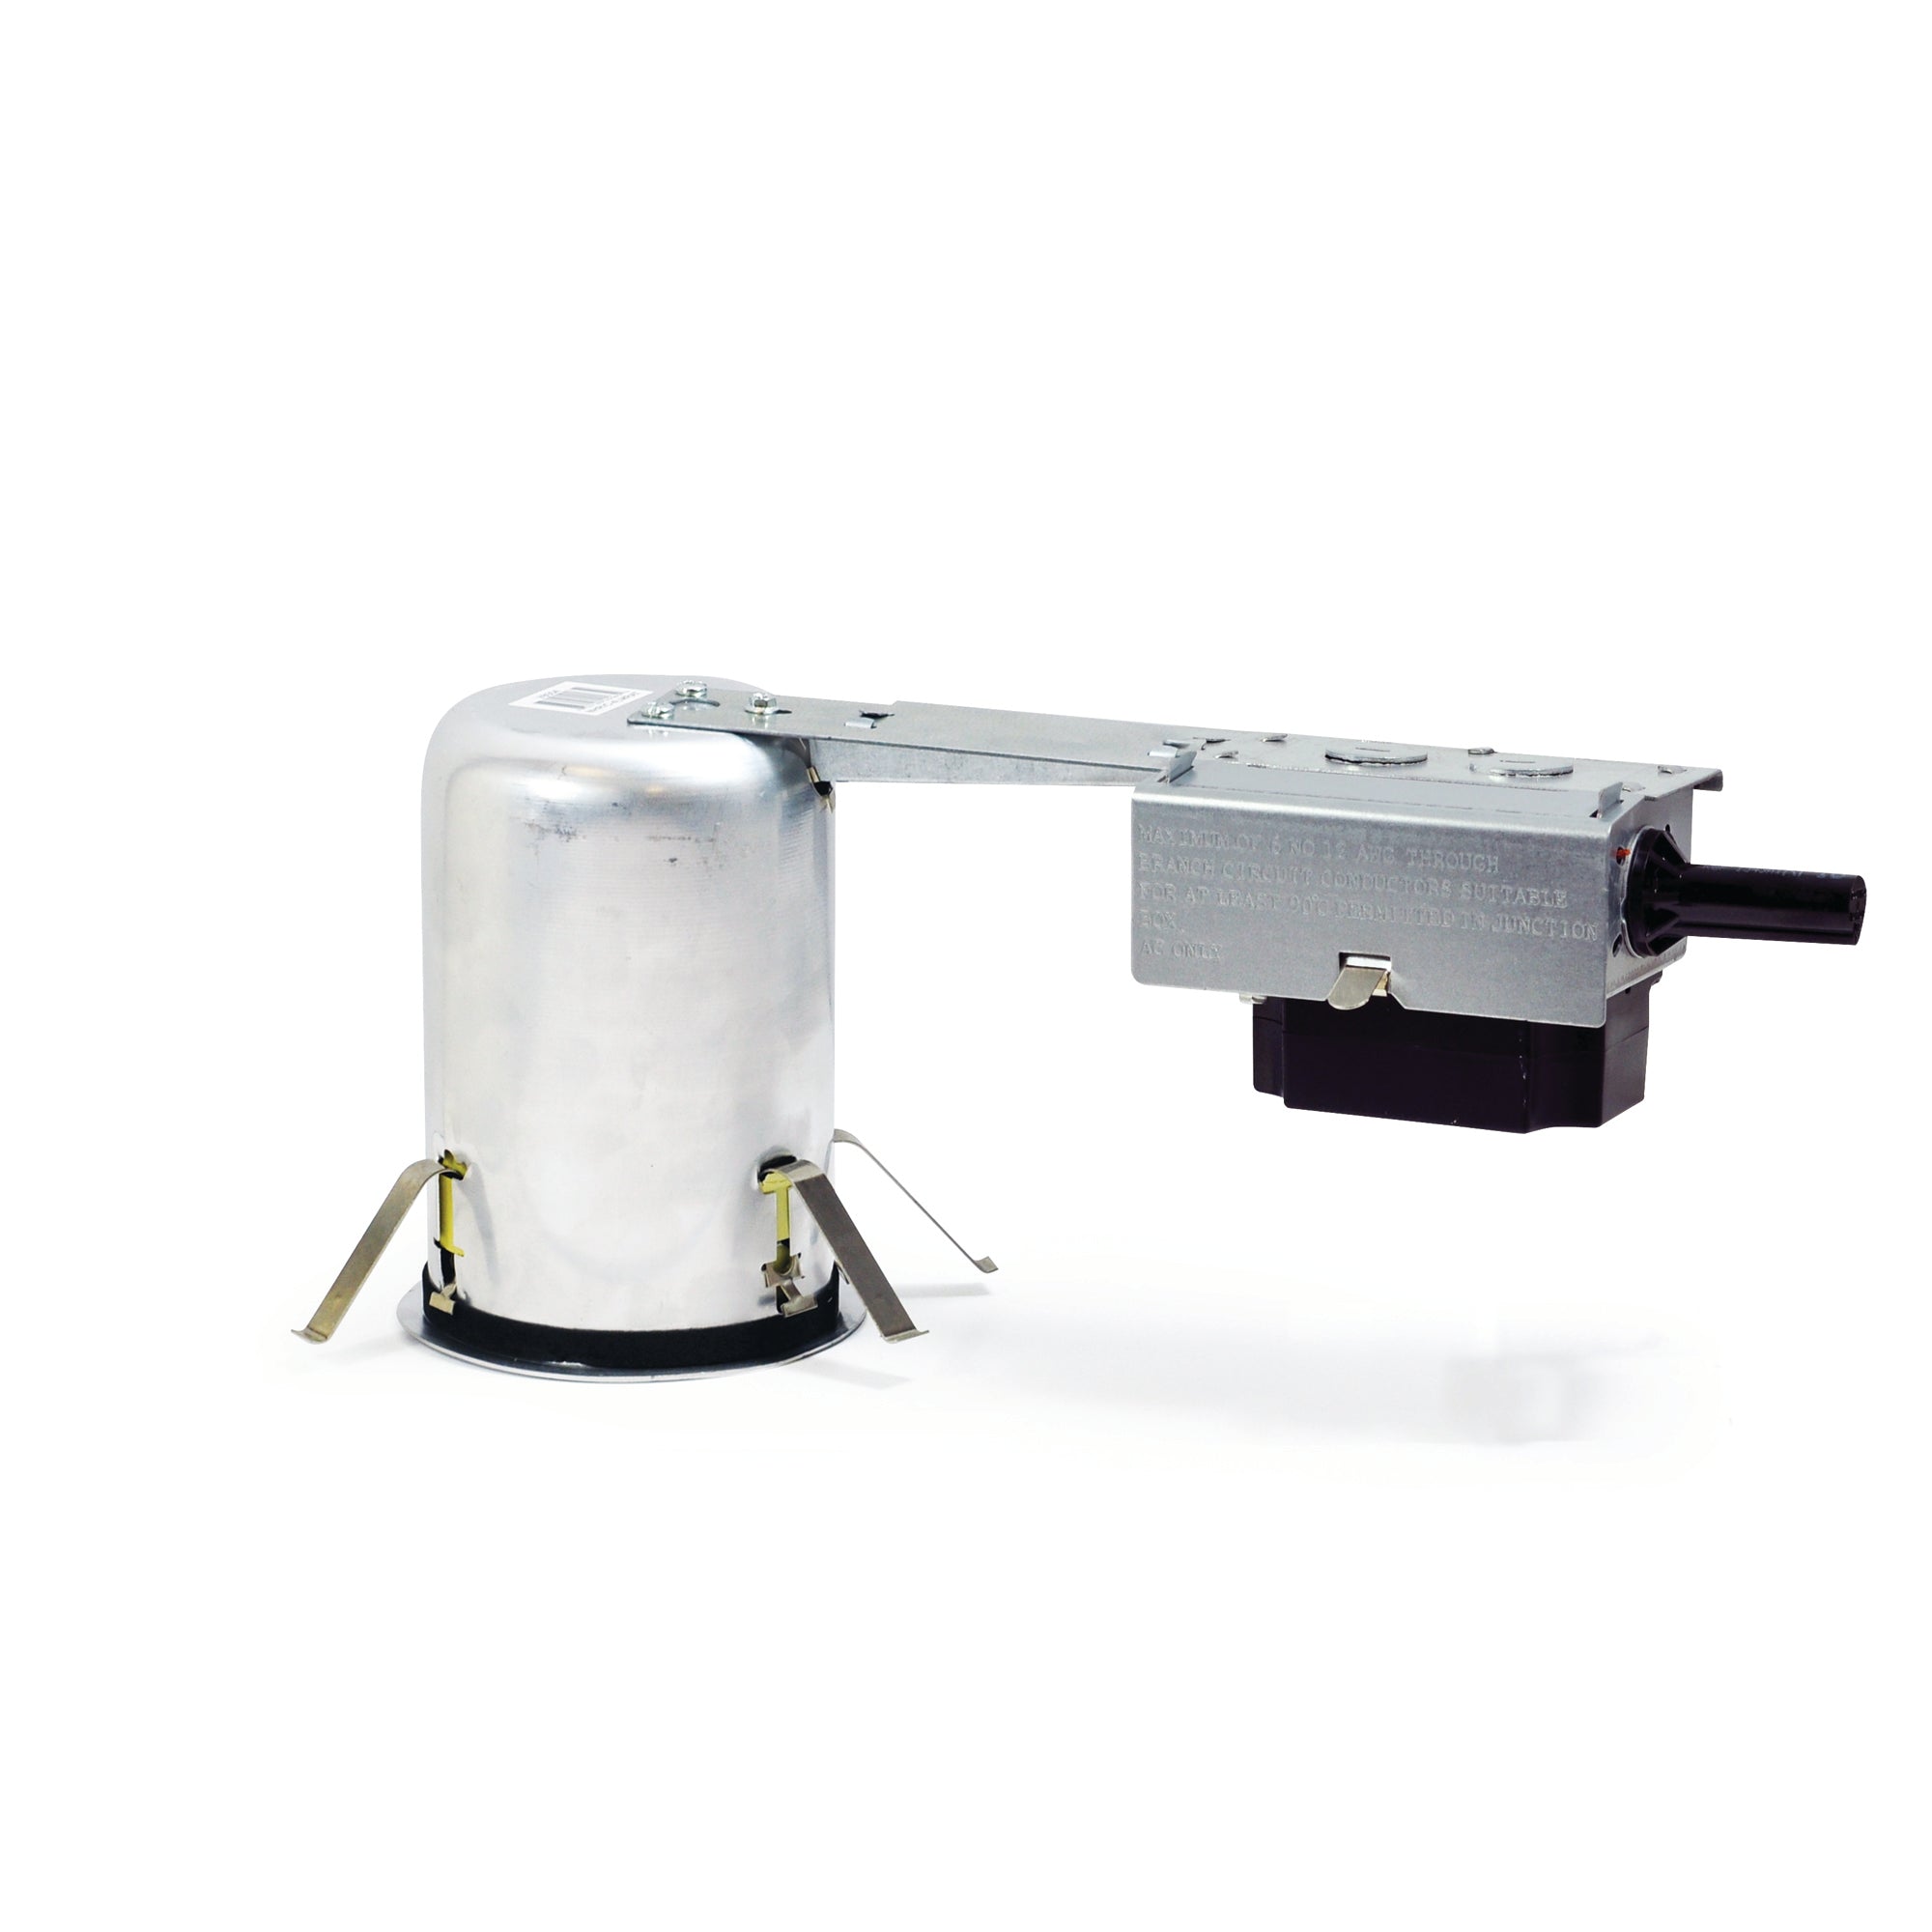 Nora Lighting NHRMIC2-409LE3 - Recessed - 4 Inch Marquise II IC Remodel Housing, 900L, 120V Triac/ELV Dimming